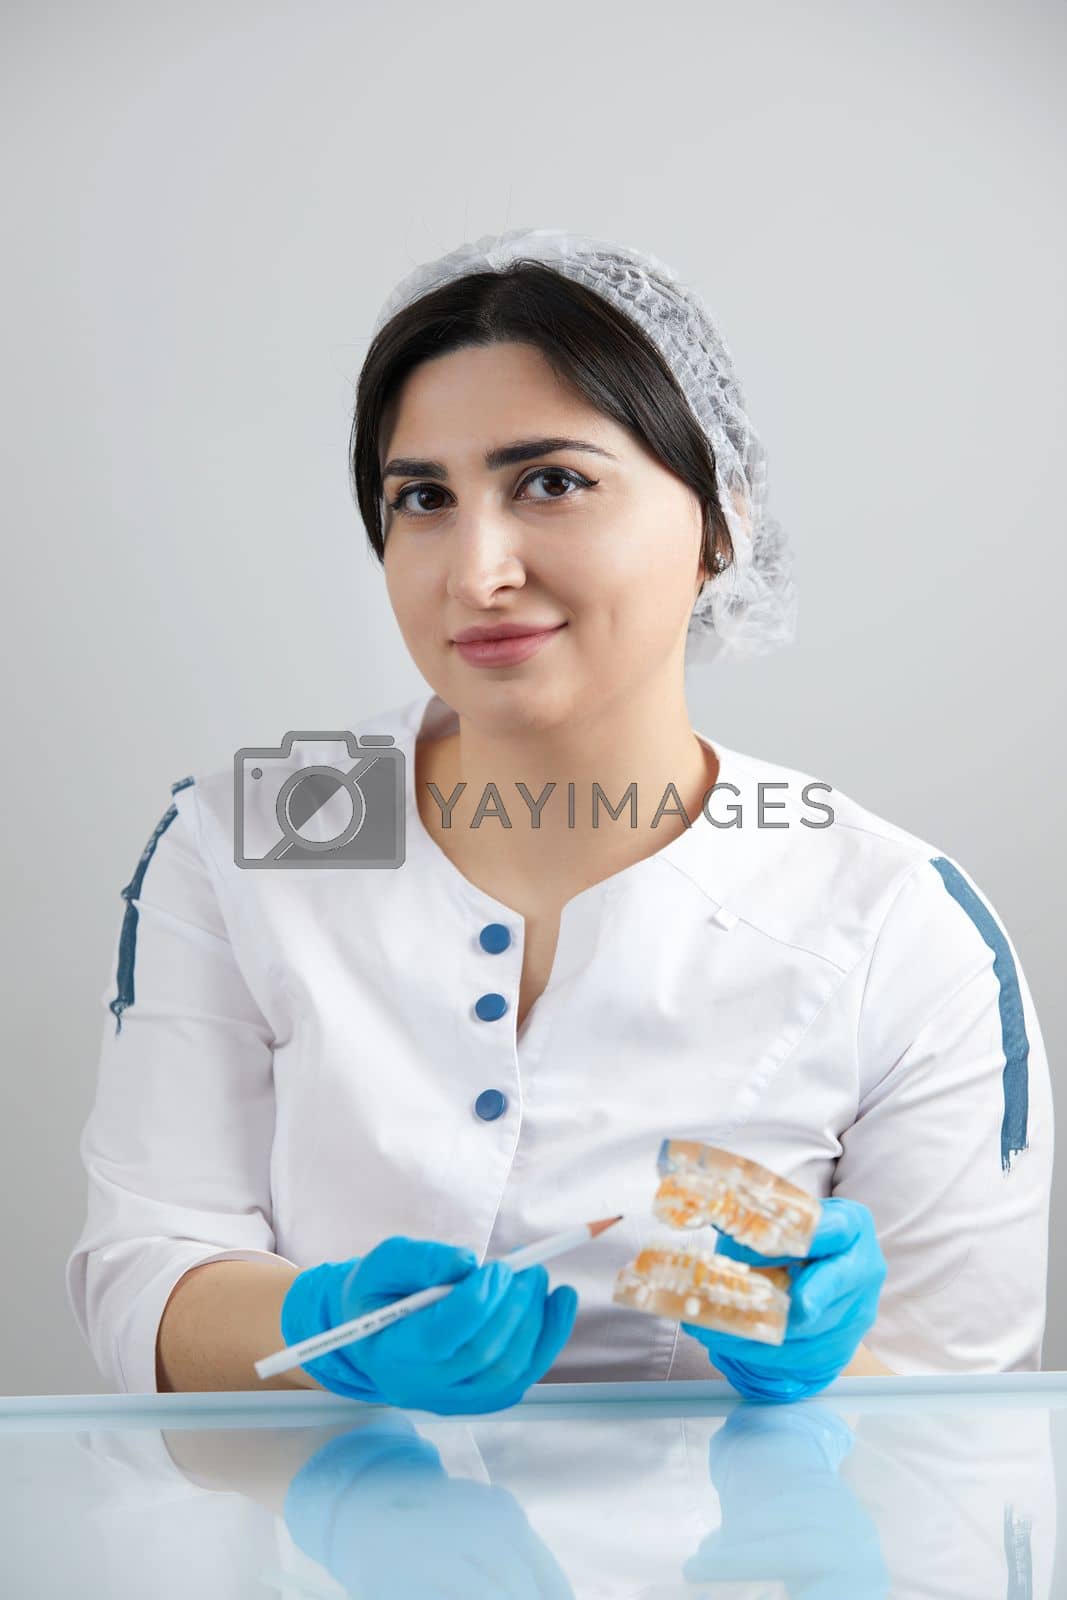 Royalty free image of Dentist showing dental teeth 3d transparent model of jaw by Mariakray